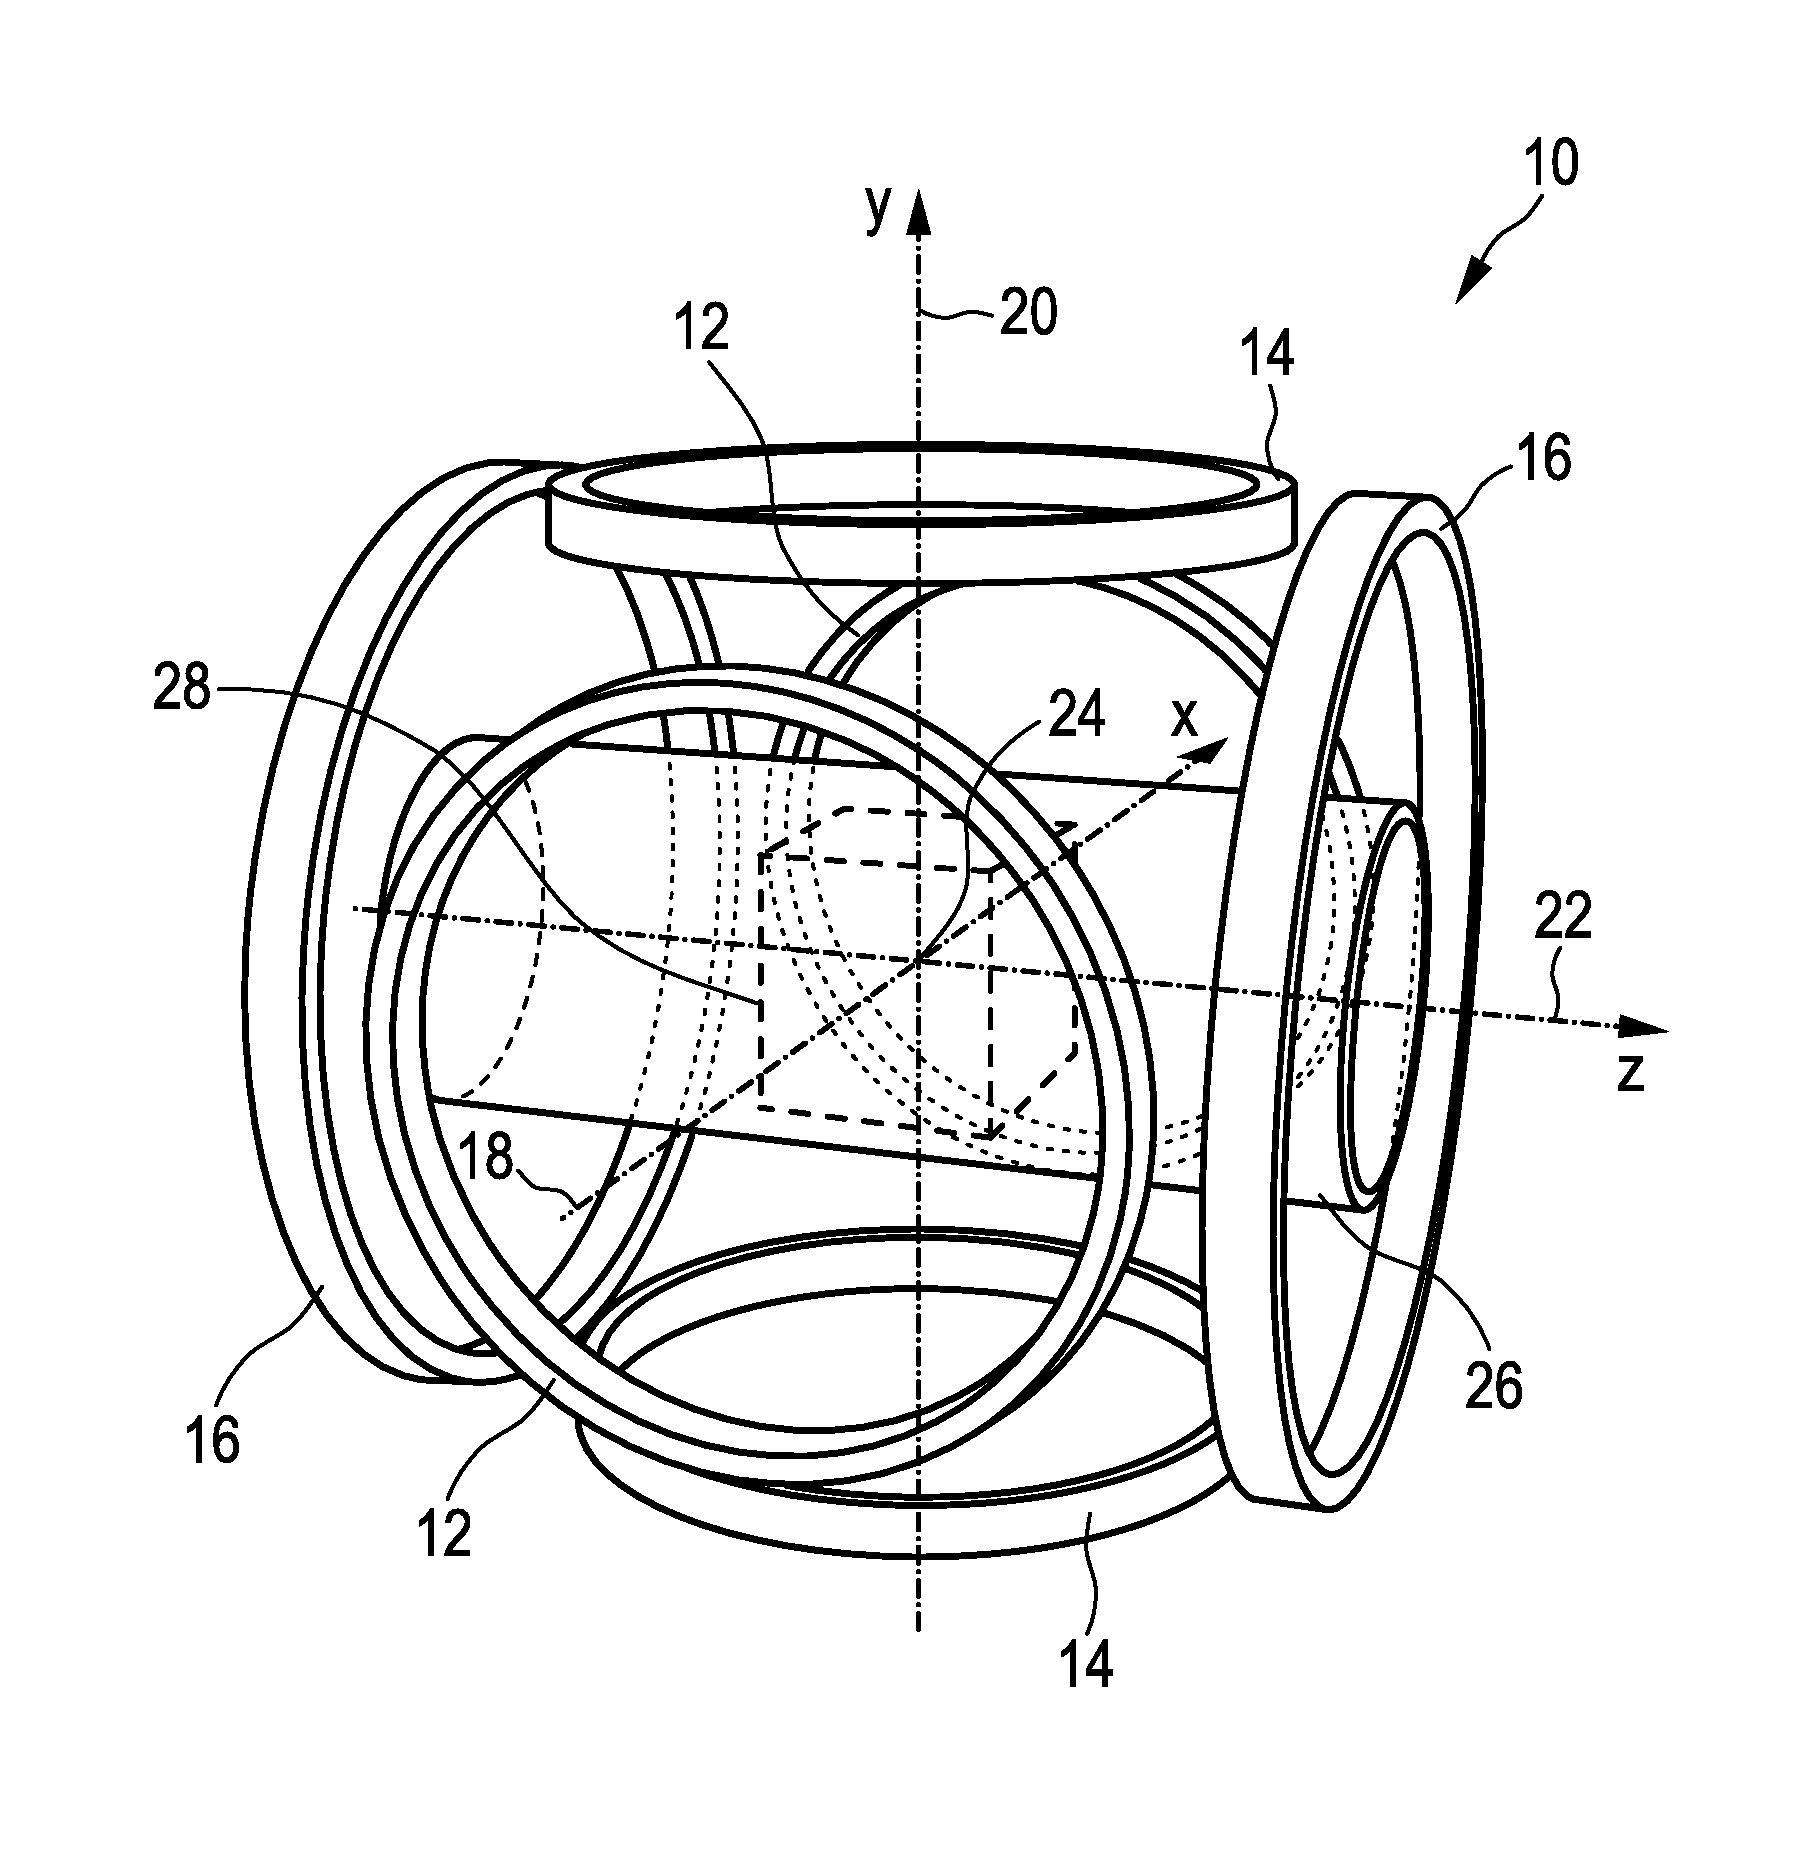 Apparatus and method for non-invasive intracardiac electrocardiography using MPI